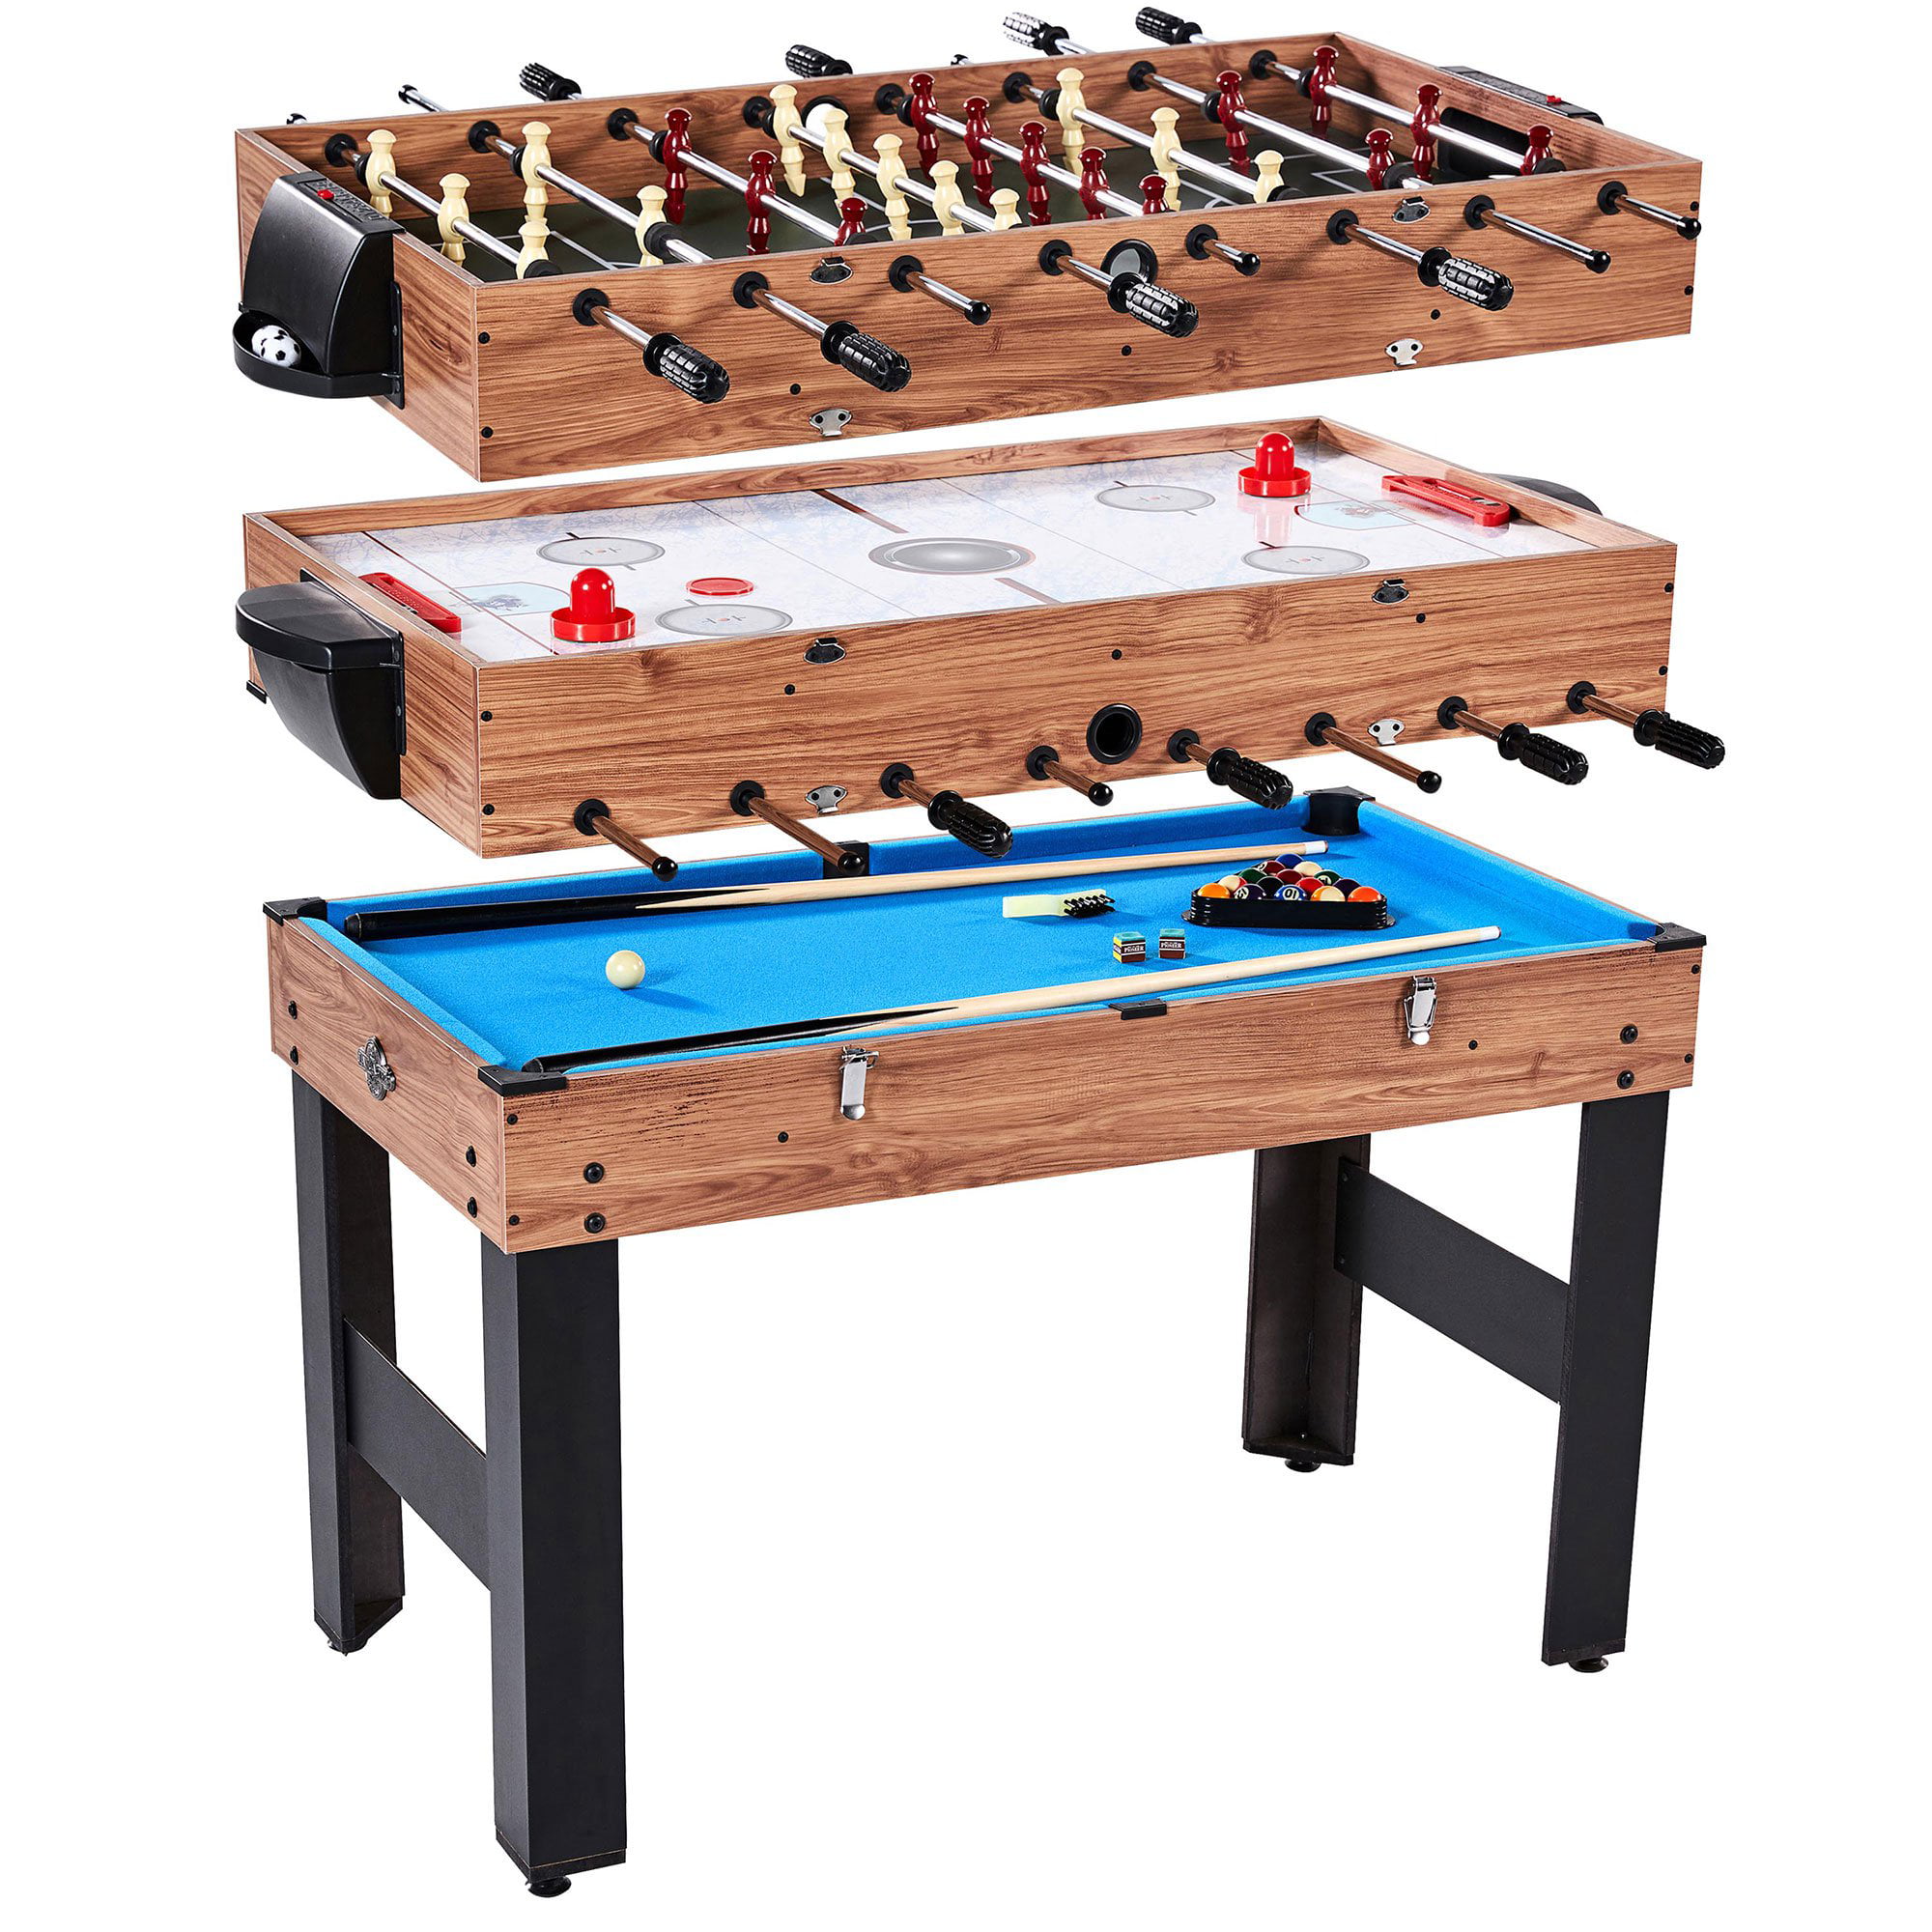 Details about   AIR HOCKEY POOL BILLIARD FOOSBALL GAME TABLE 48" 3-in-1 Accessories Included